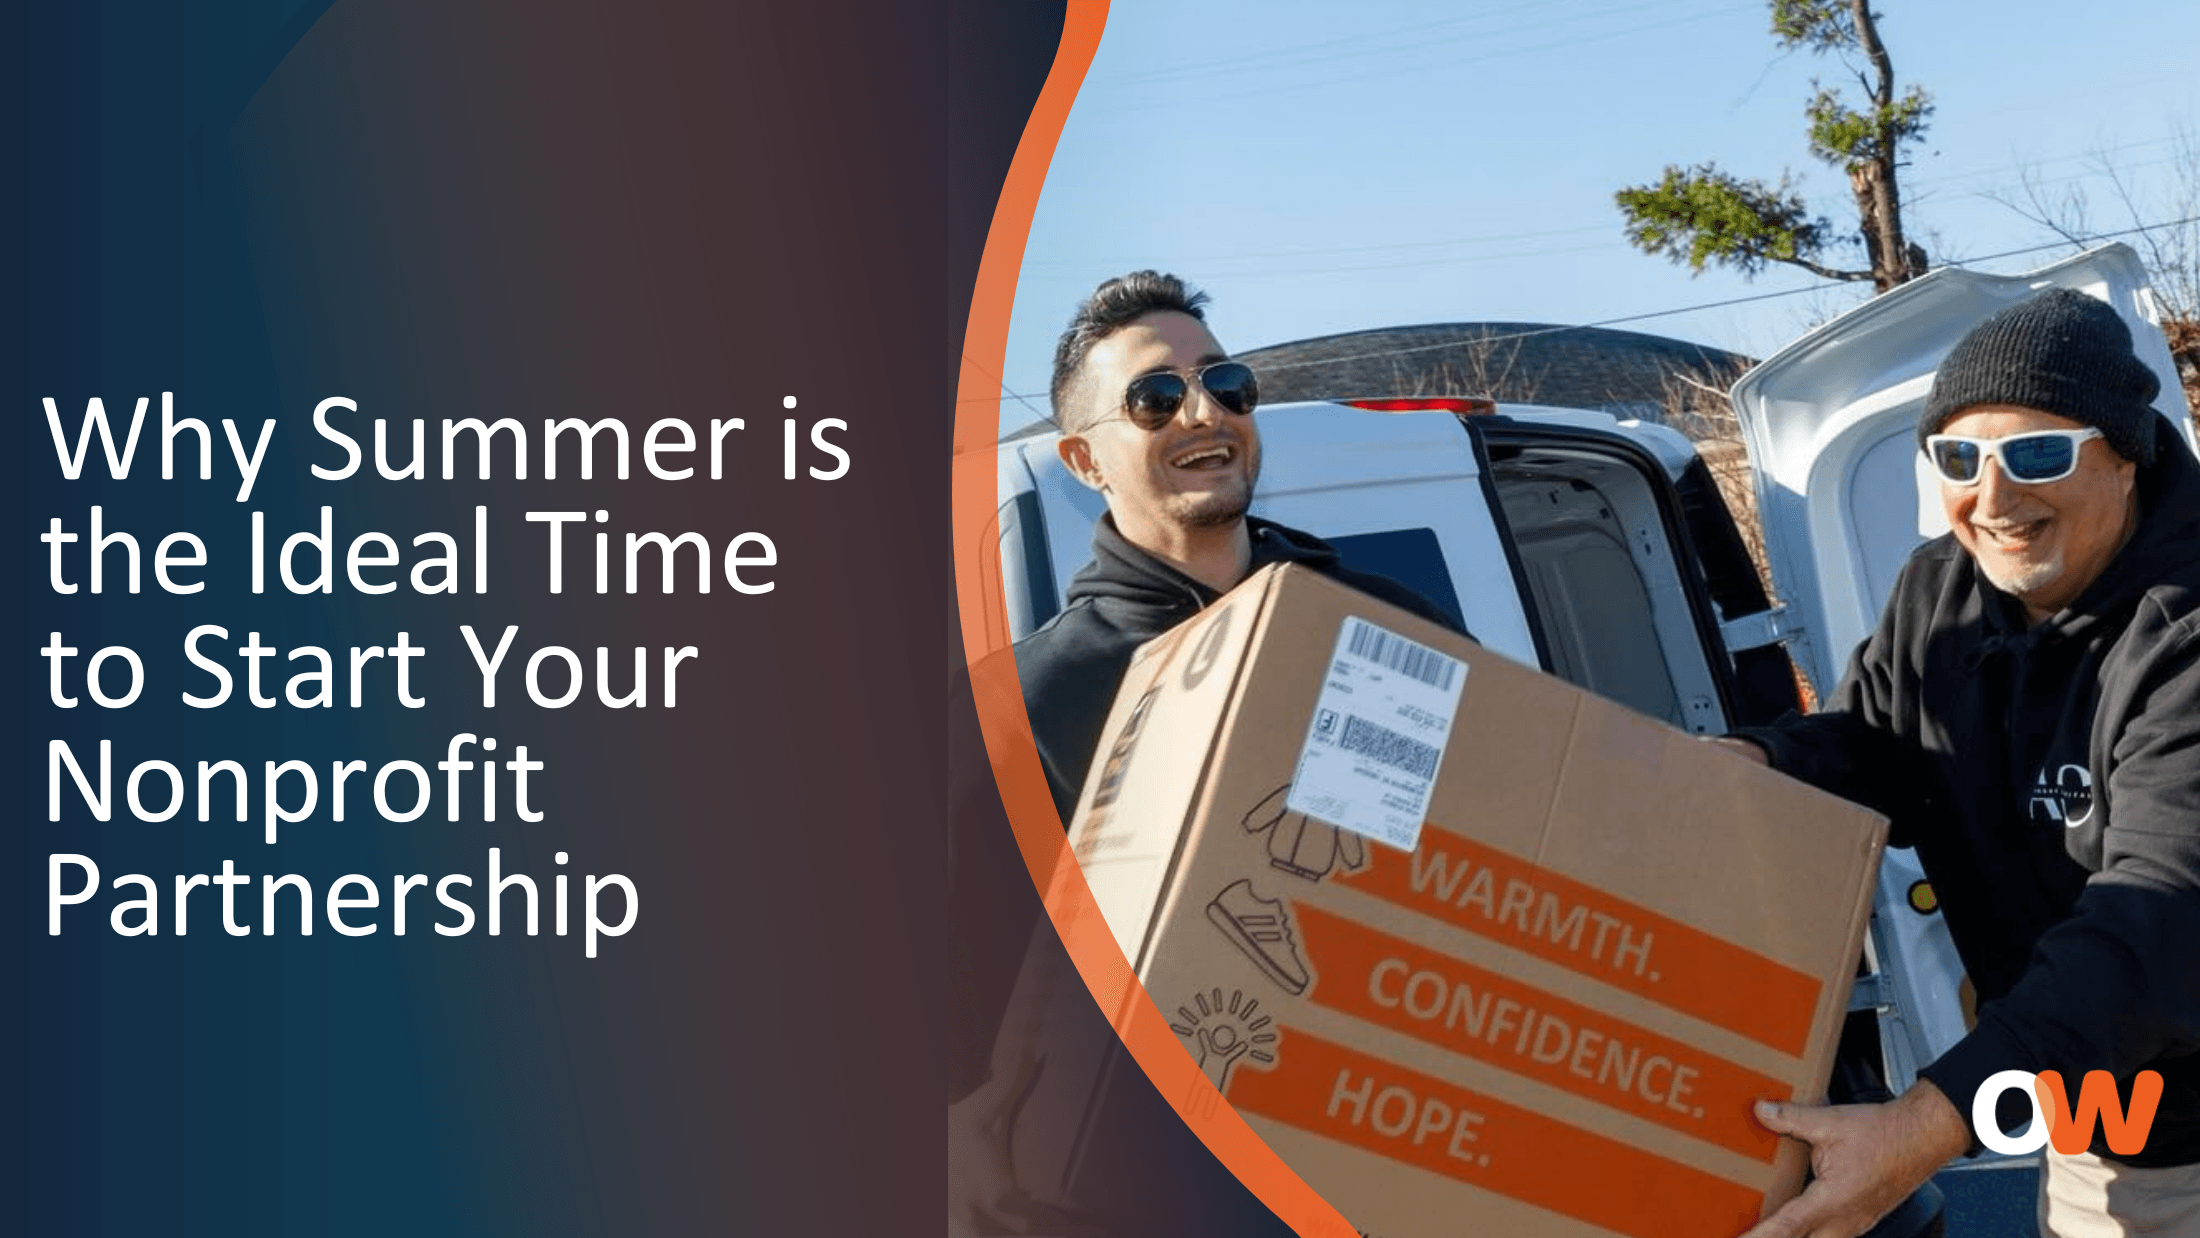 Why Summer is the Ideal Time to Start Your Nonprofit Partnership